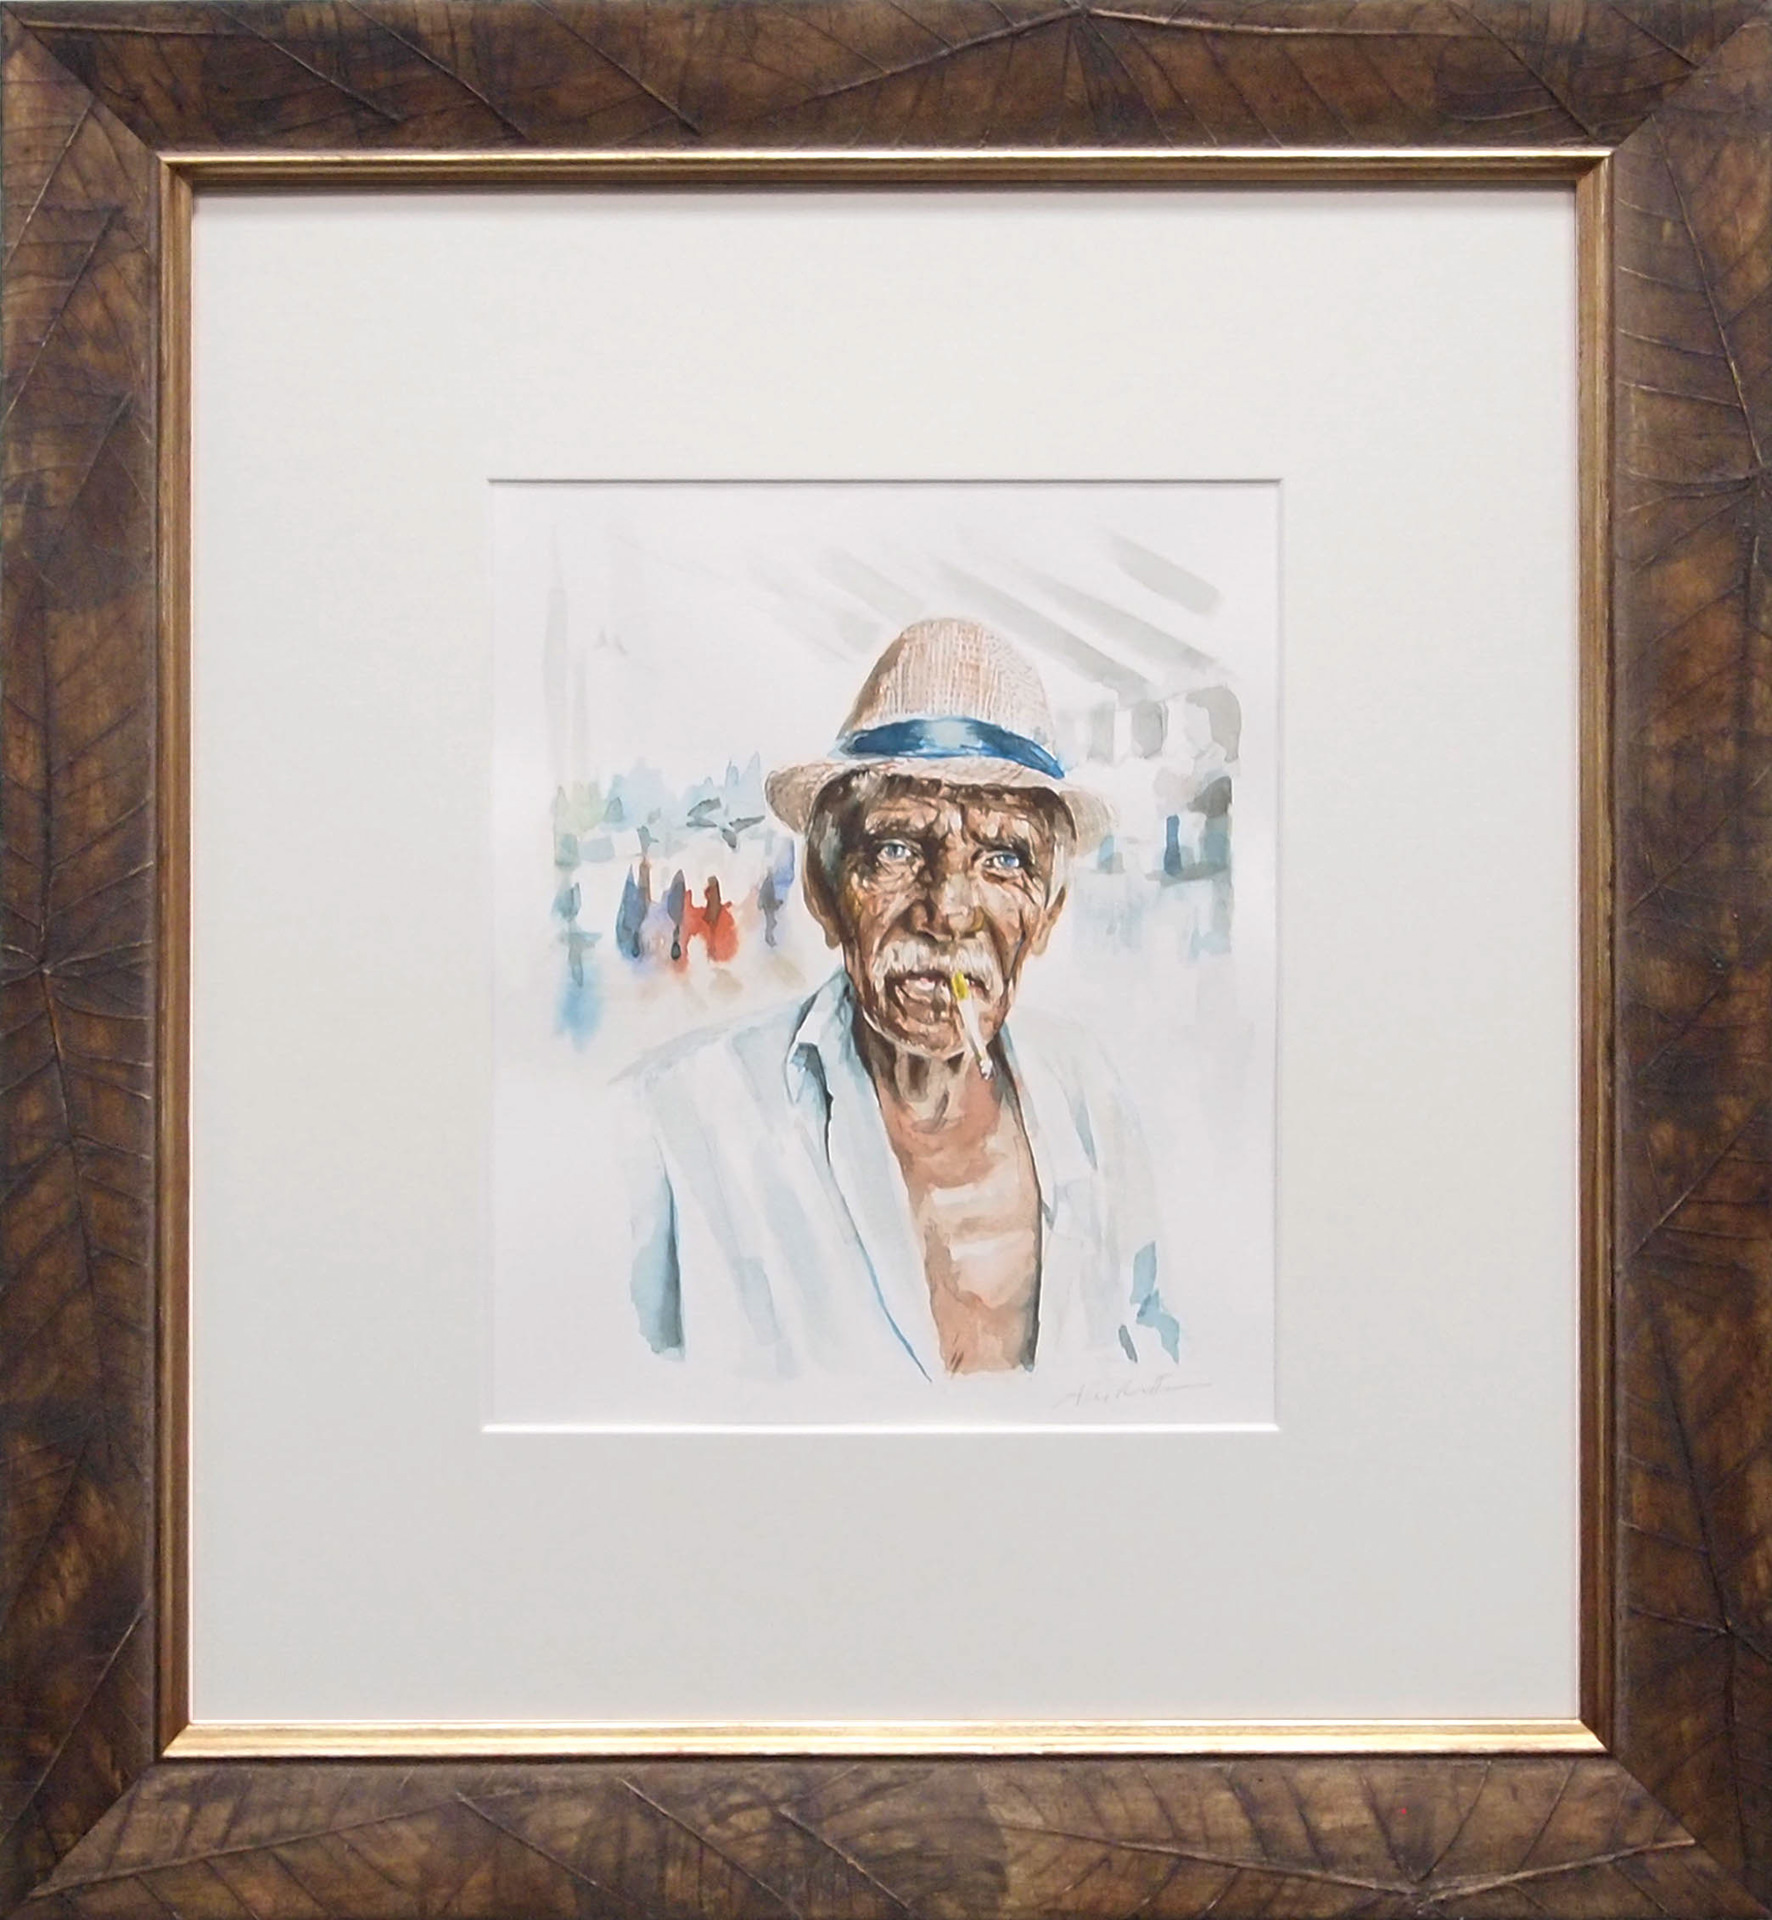 Watercolor portrait of 'Old Man Domenico' by Alex Righetto, depicting an elderly man with deep blue eyes and a storied face, framed in an exclusive brown wood frame, symbolizing a personal narrative intertwined with global history.